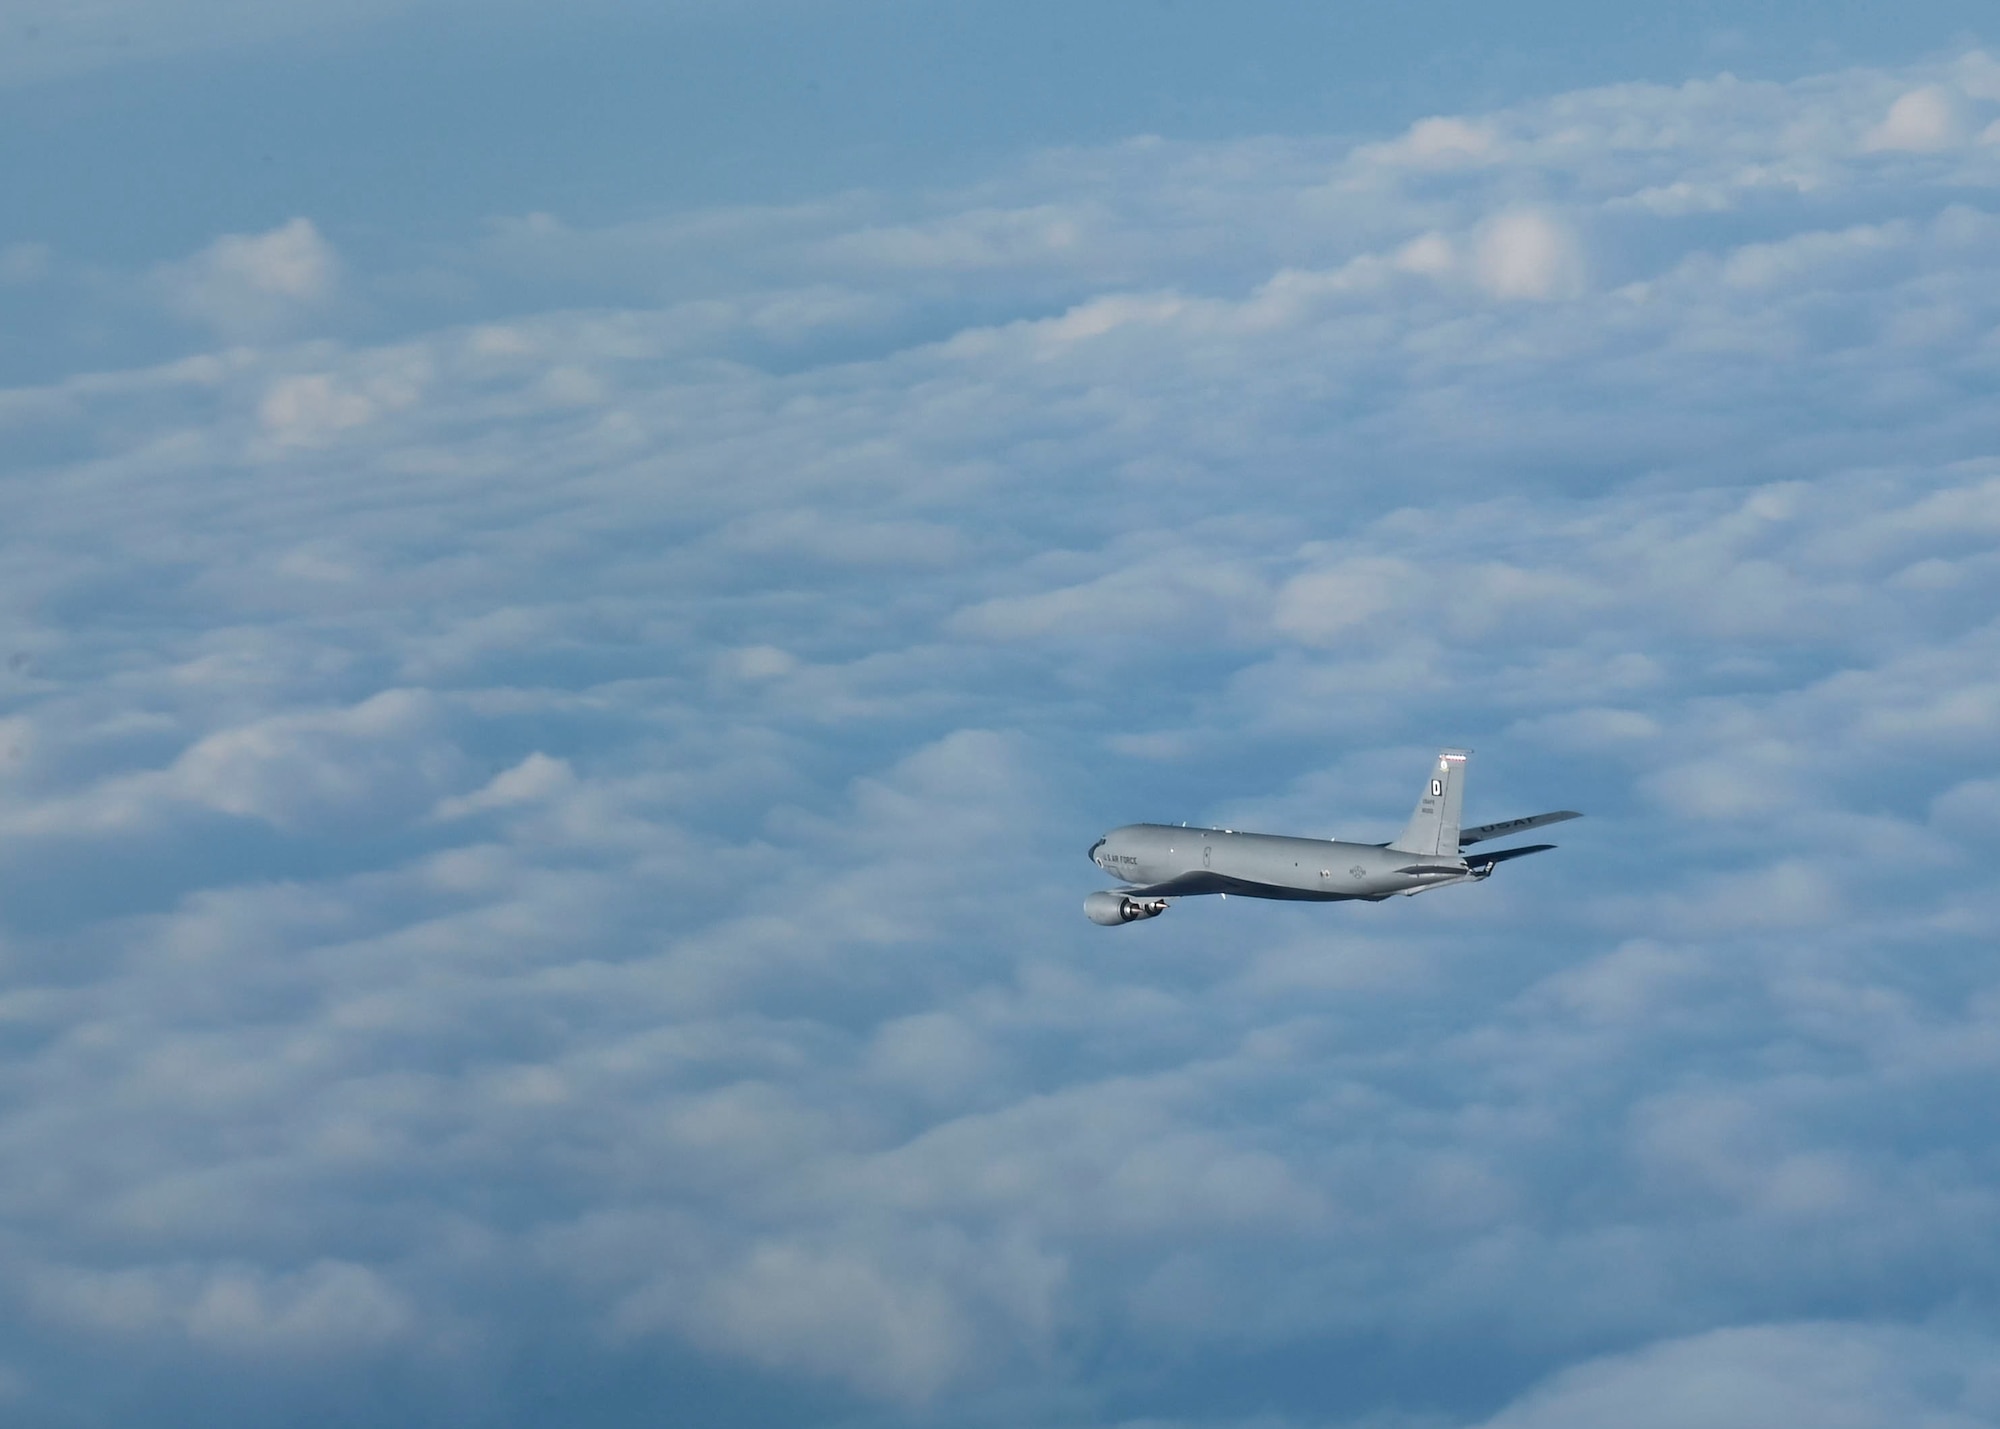 The KC-135 capabilities extend airborne training time and combat radius, ensuring U.S. and allied nation aircraft are postured to maintain regional peace and stability in the European theatre.